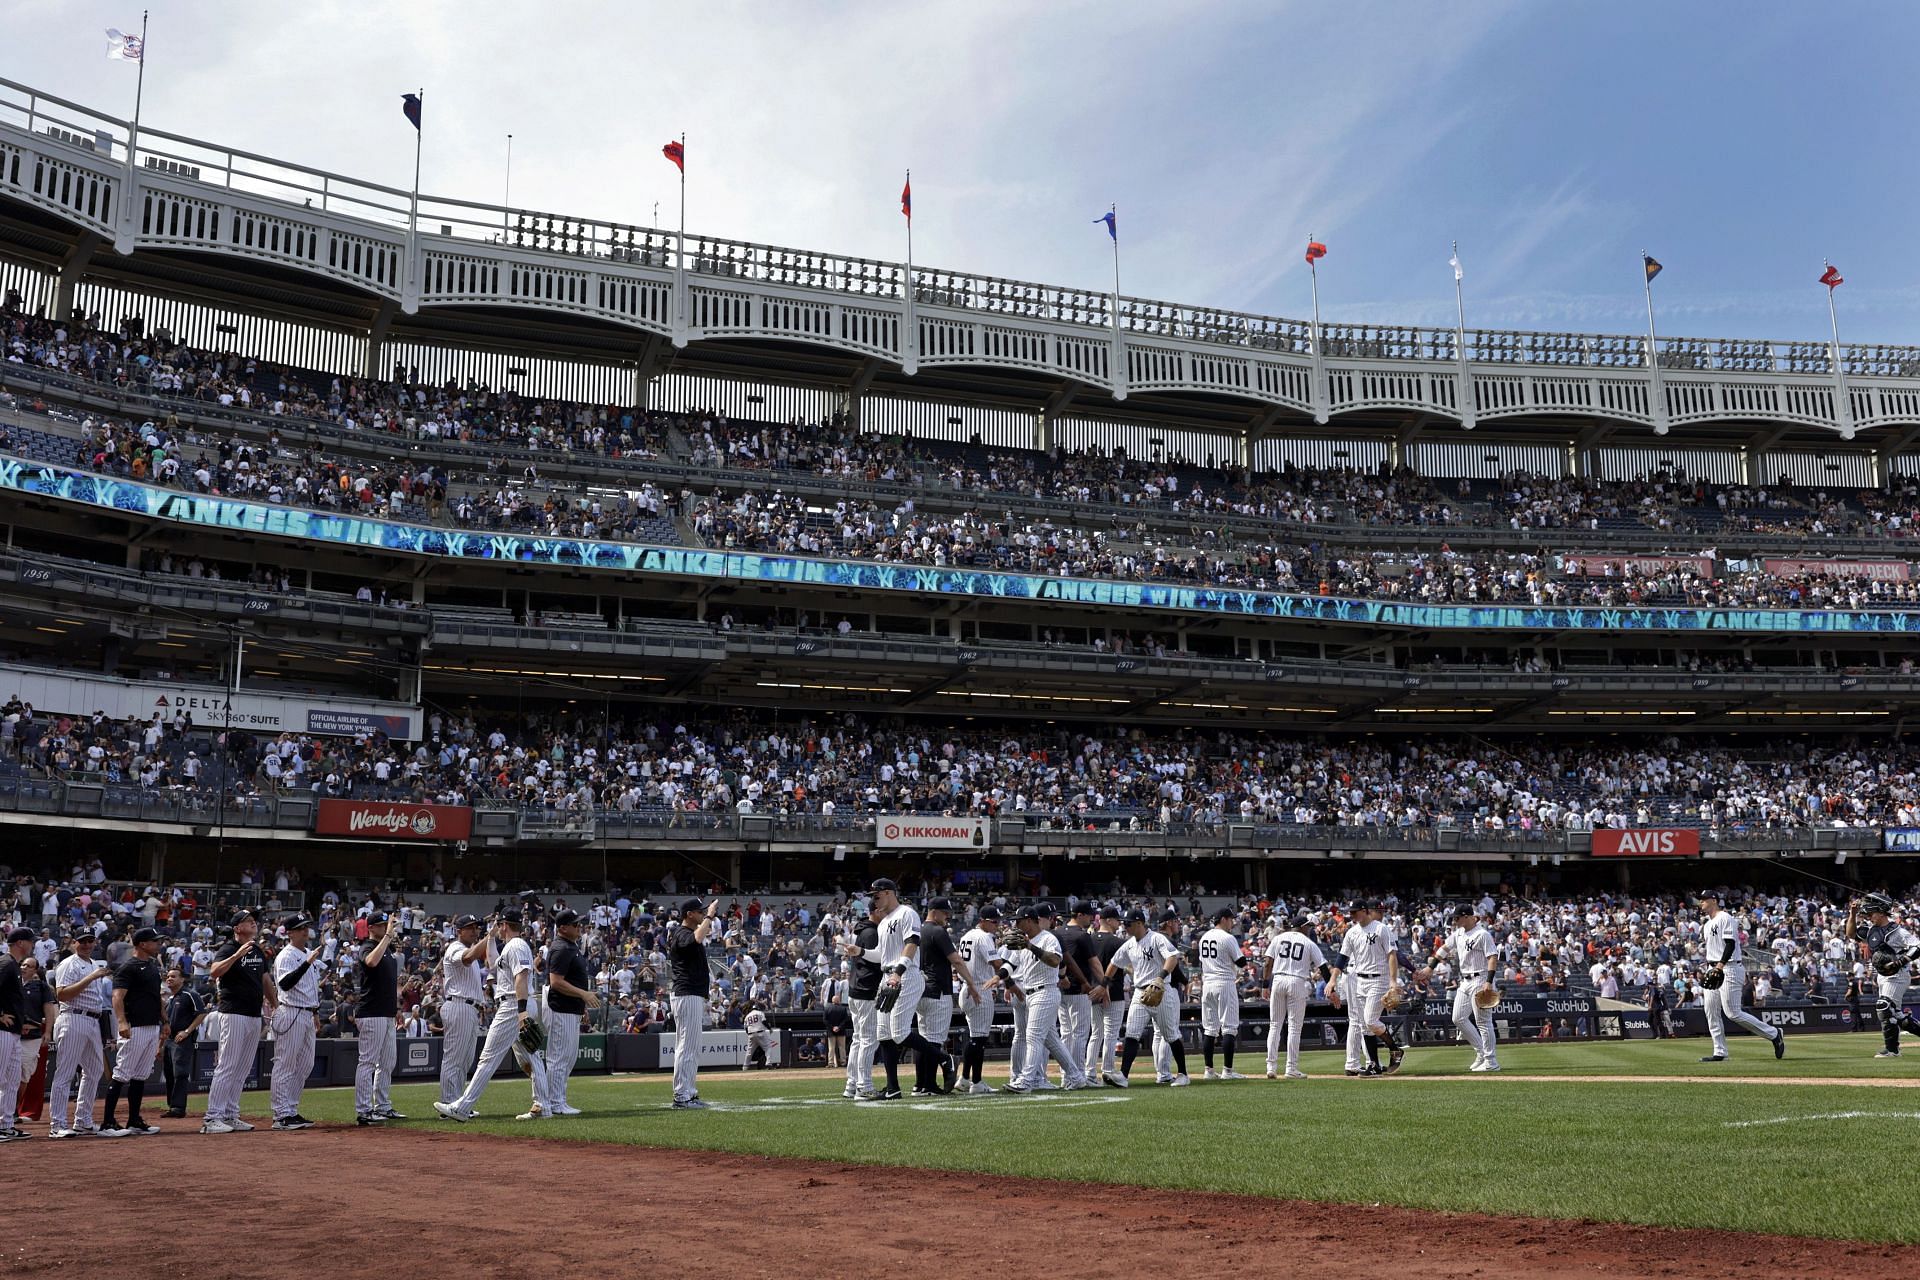 New York Yankees celebrate after defeating the Houston Astros at Yankee Stadium